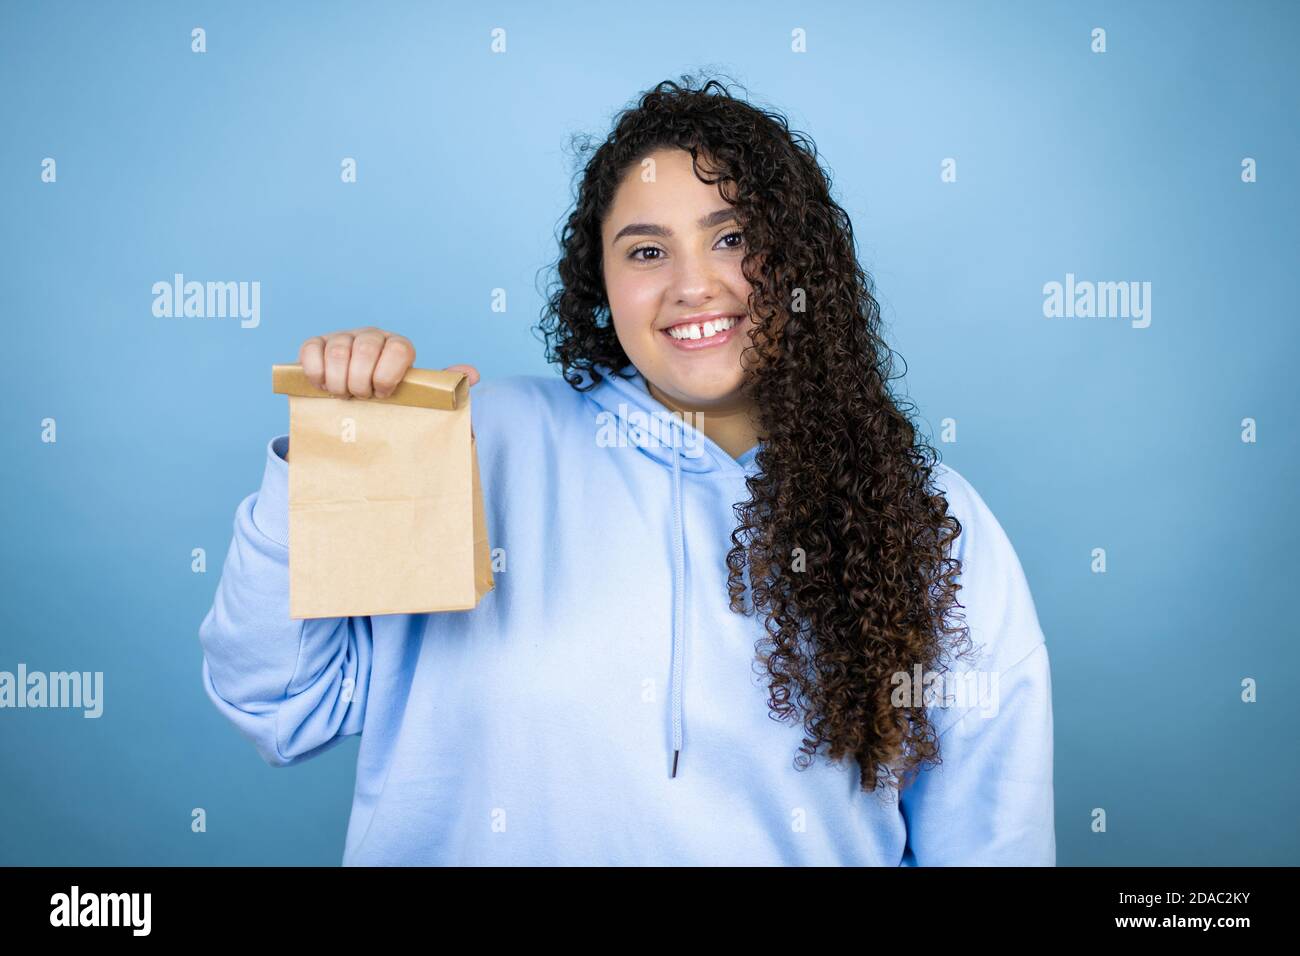 https://c8.alamy.com/comp/2DAC2KY/young-beautiful-woman-wearing-casual-sweatshirt-over-isolated-blue-background-smiling-and-holding-a-paper-bag-2DAC2KY.jpg